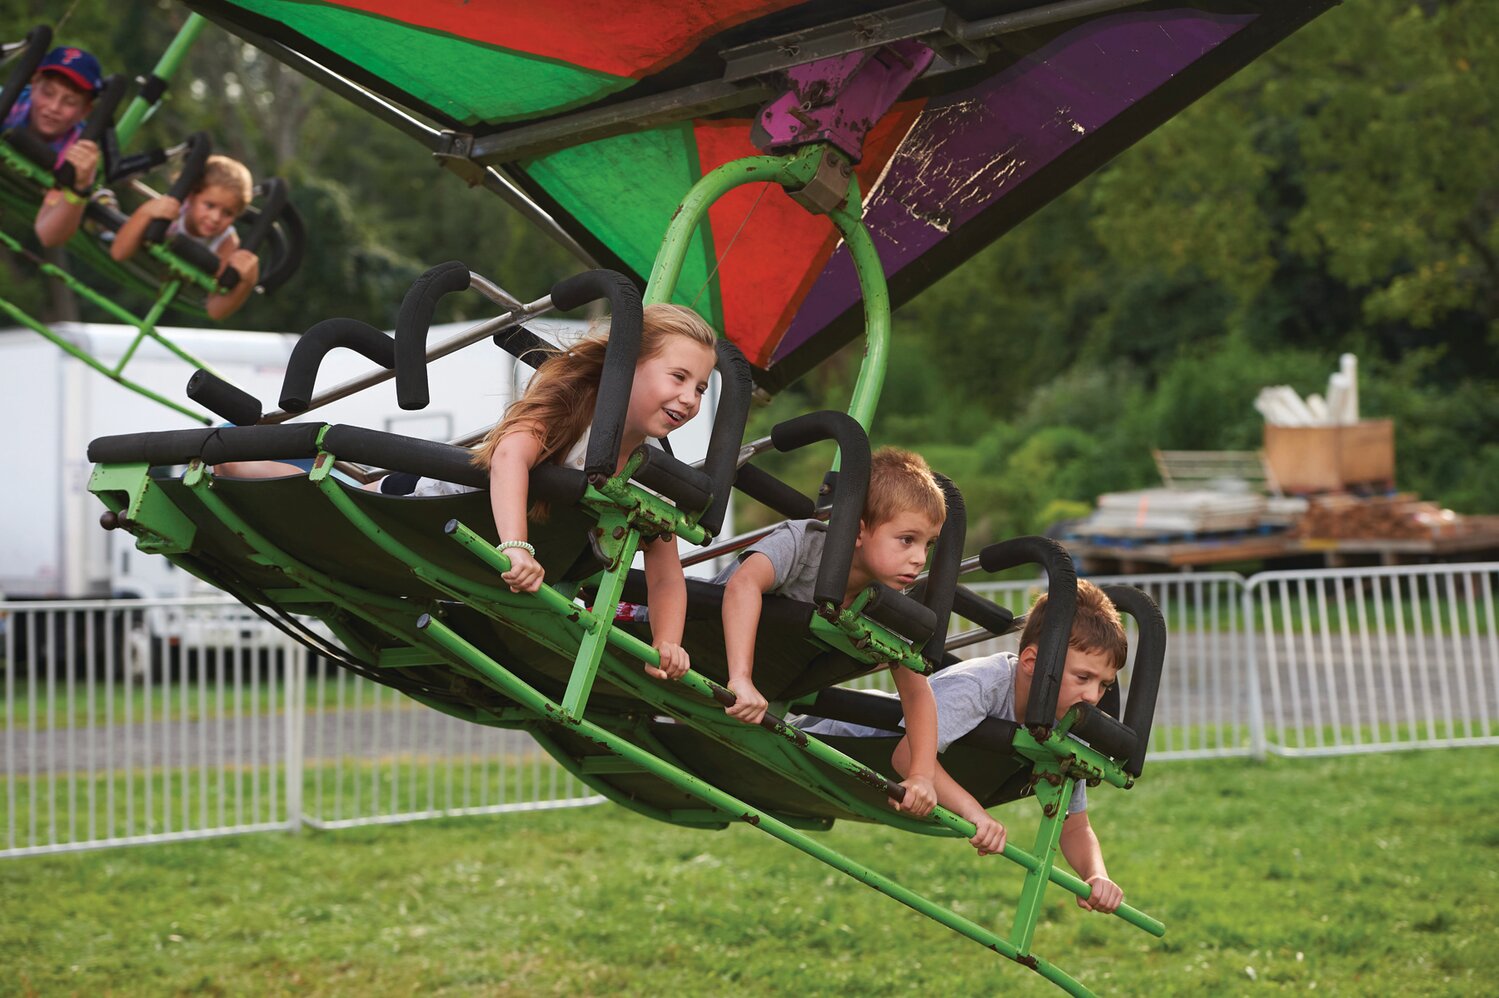 Lucy Jacobs, 8, with her 5-year-old brother, Sammy, and Benjamin Boscoe, 7, on the Cliff Hanger at the Middletown Grange Fair in Wrightstown Aug. 17.